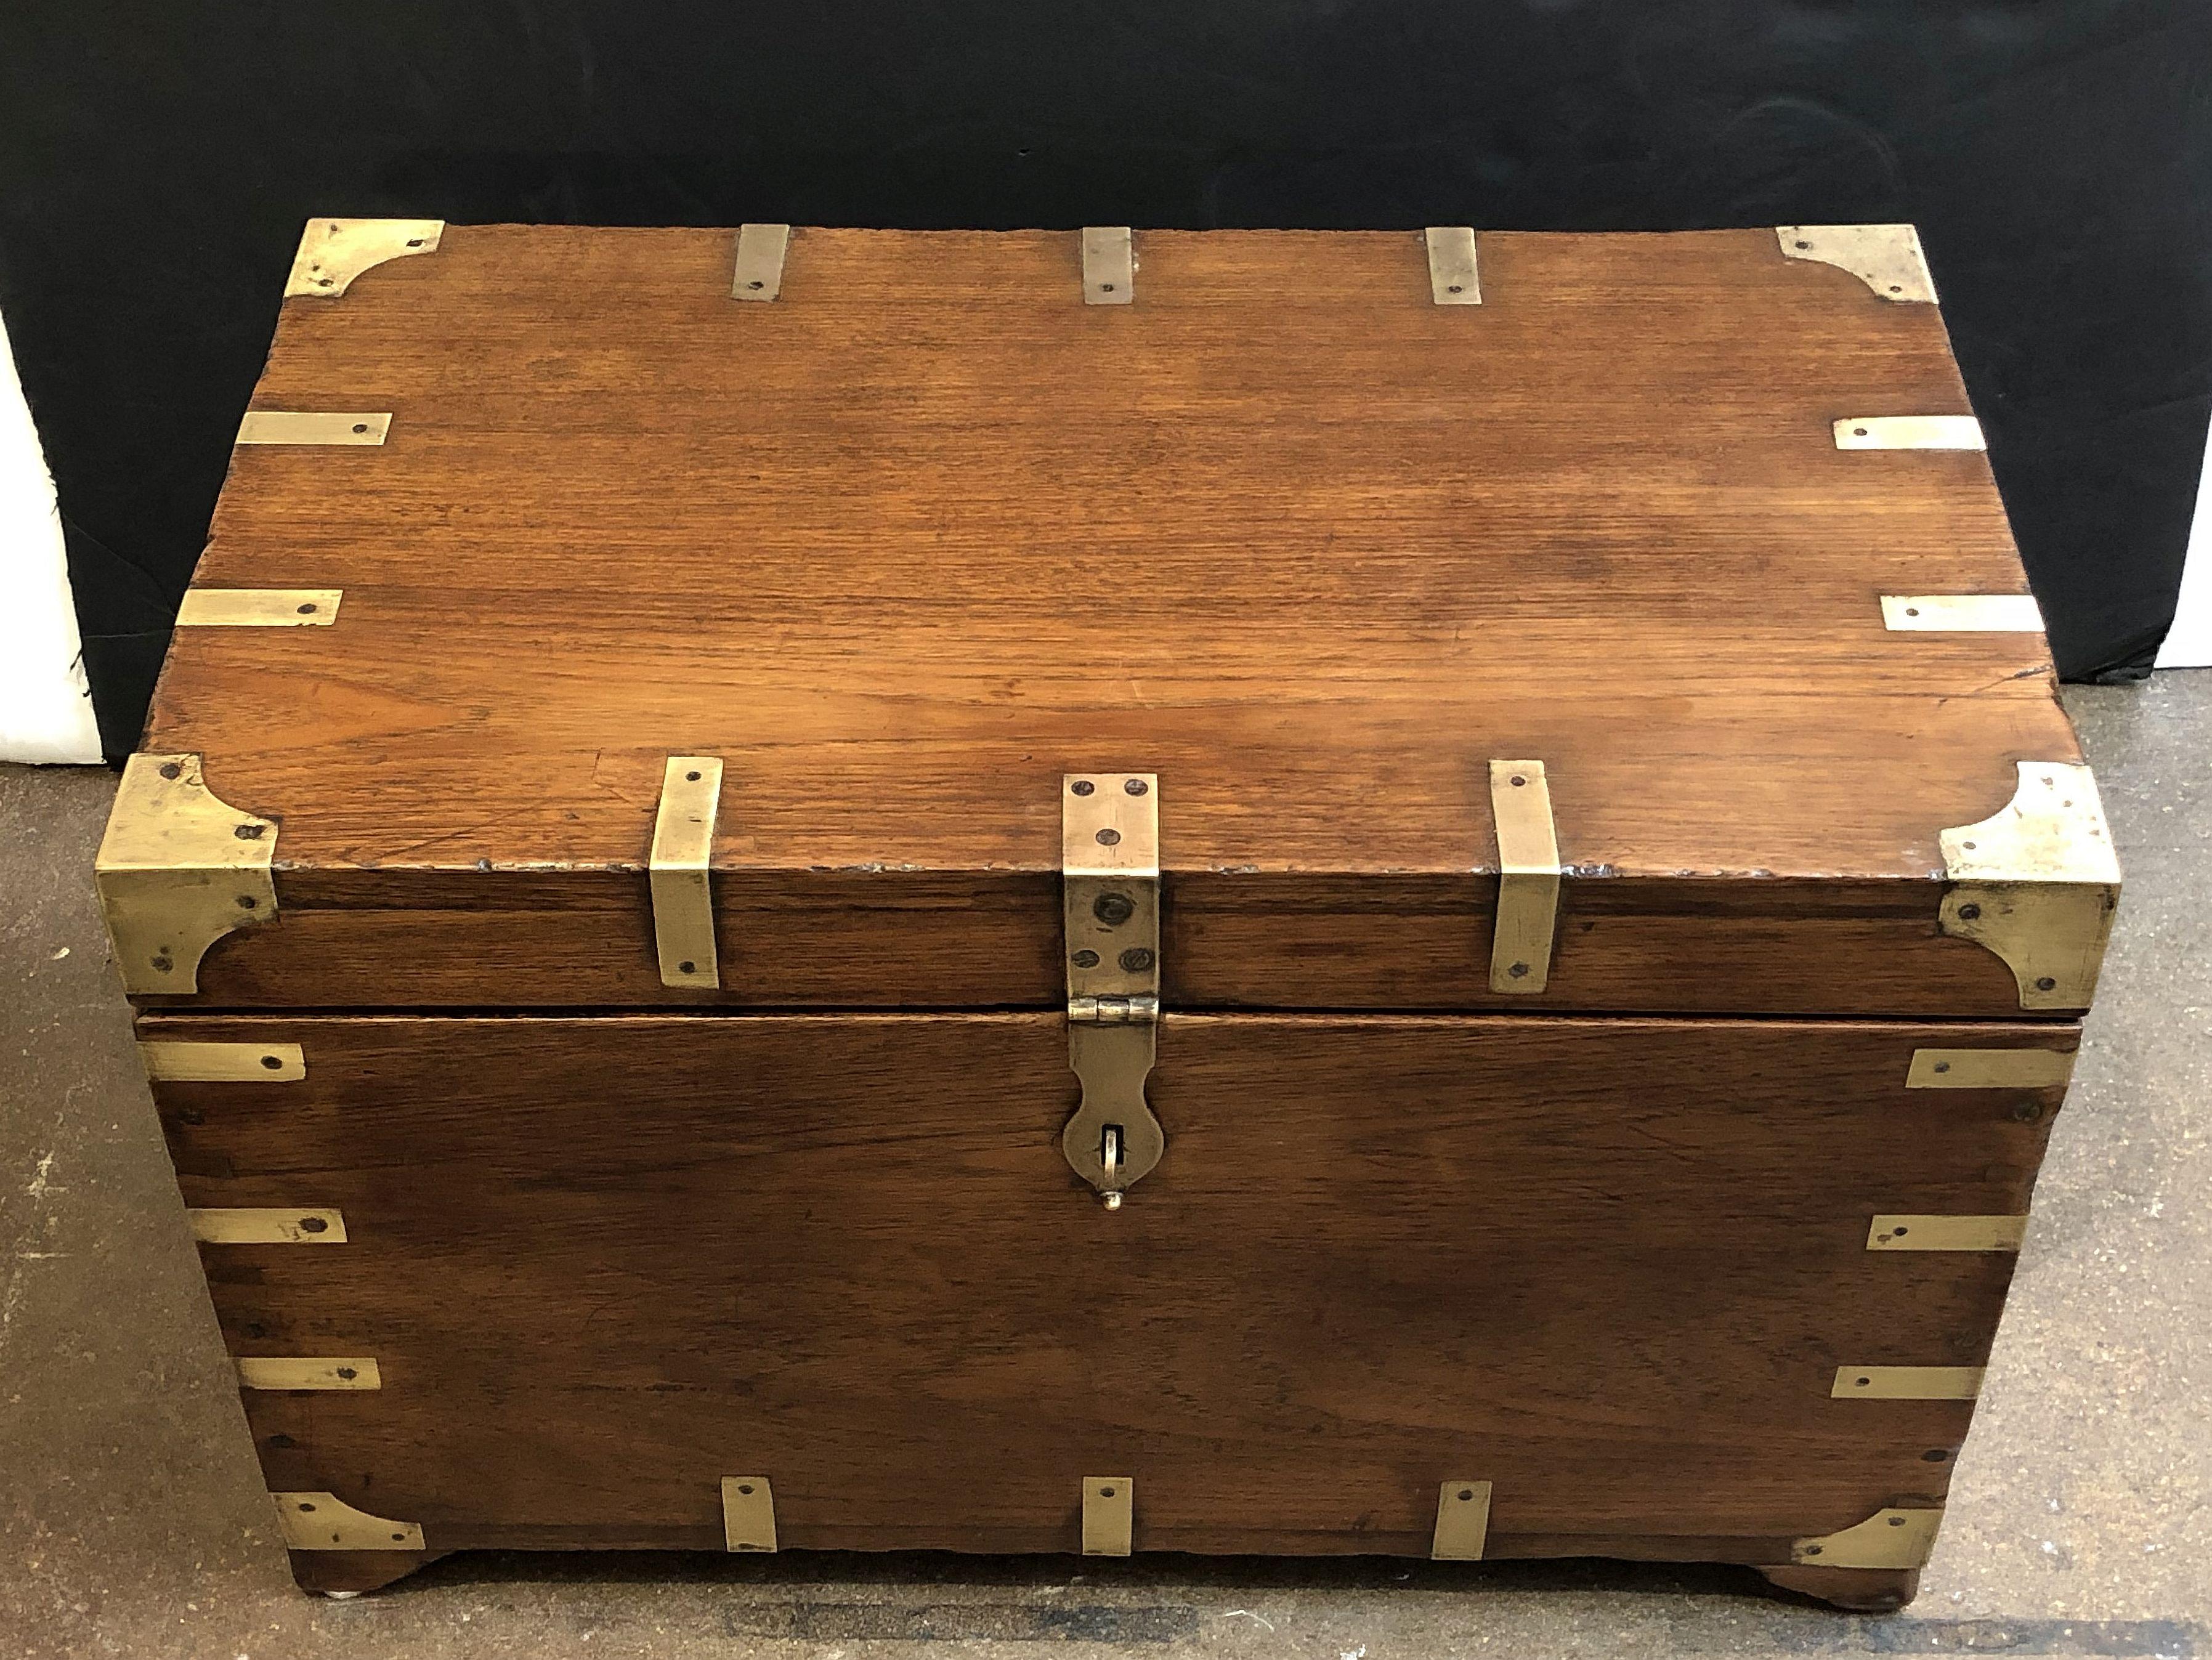 English British Military Officer's Campaign Trunk of Brass-Bound Teak